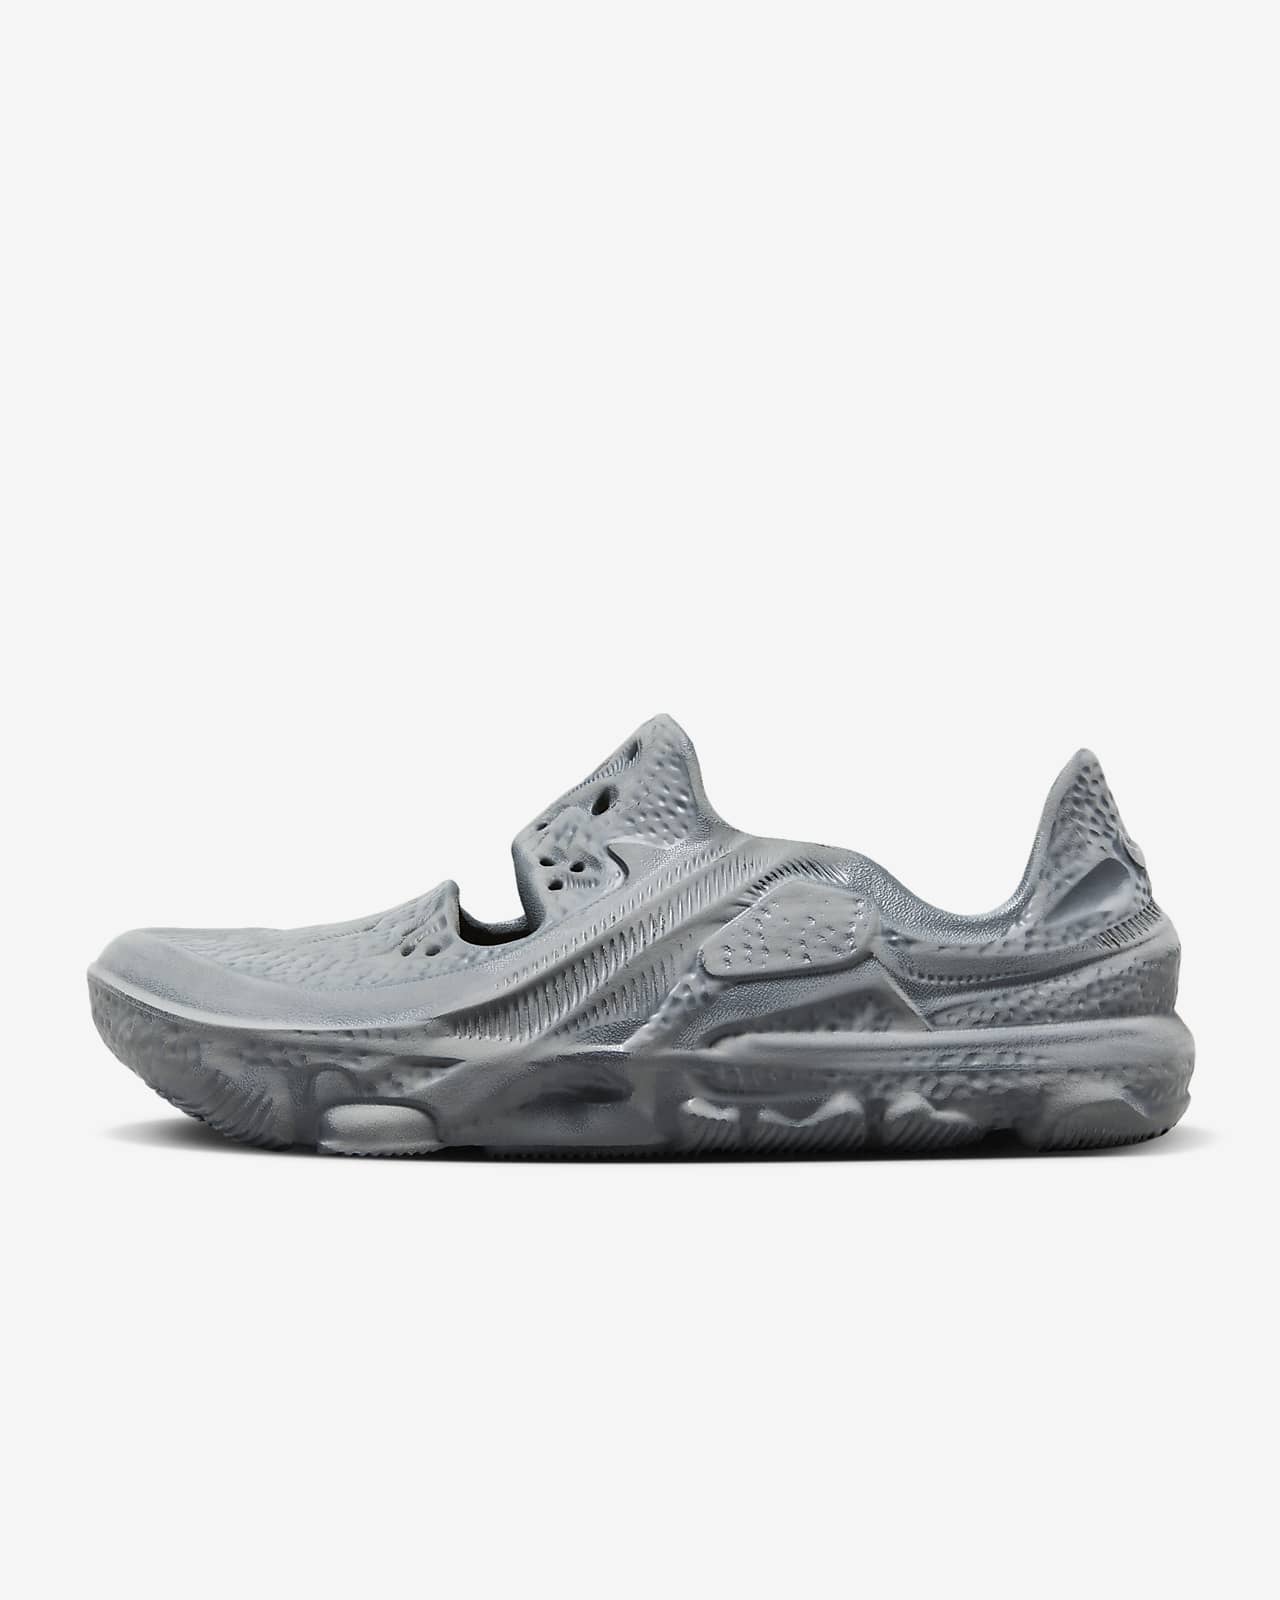 Chaussure Nike ISPA Universal pour homme